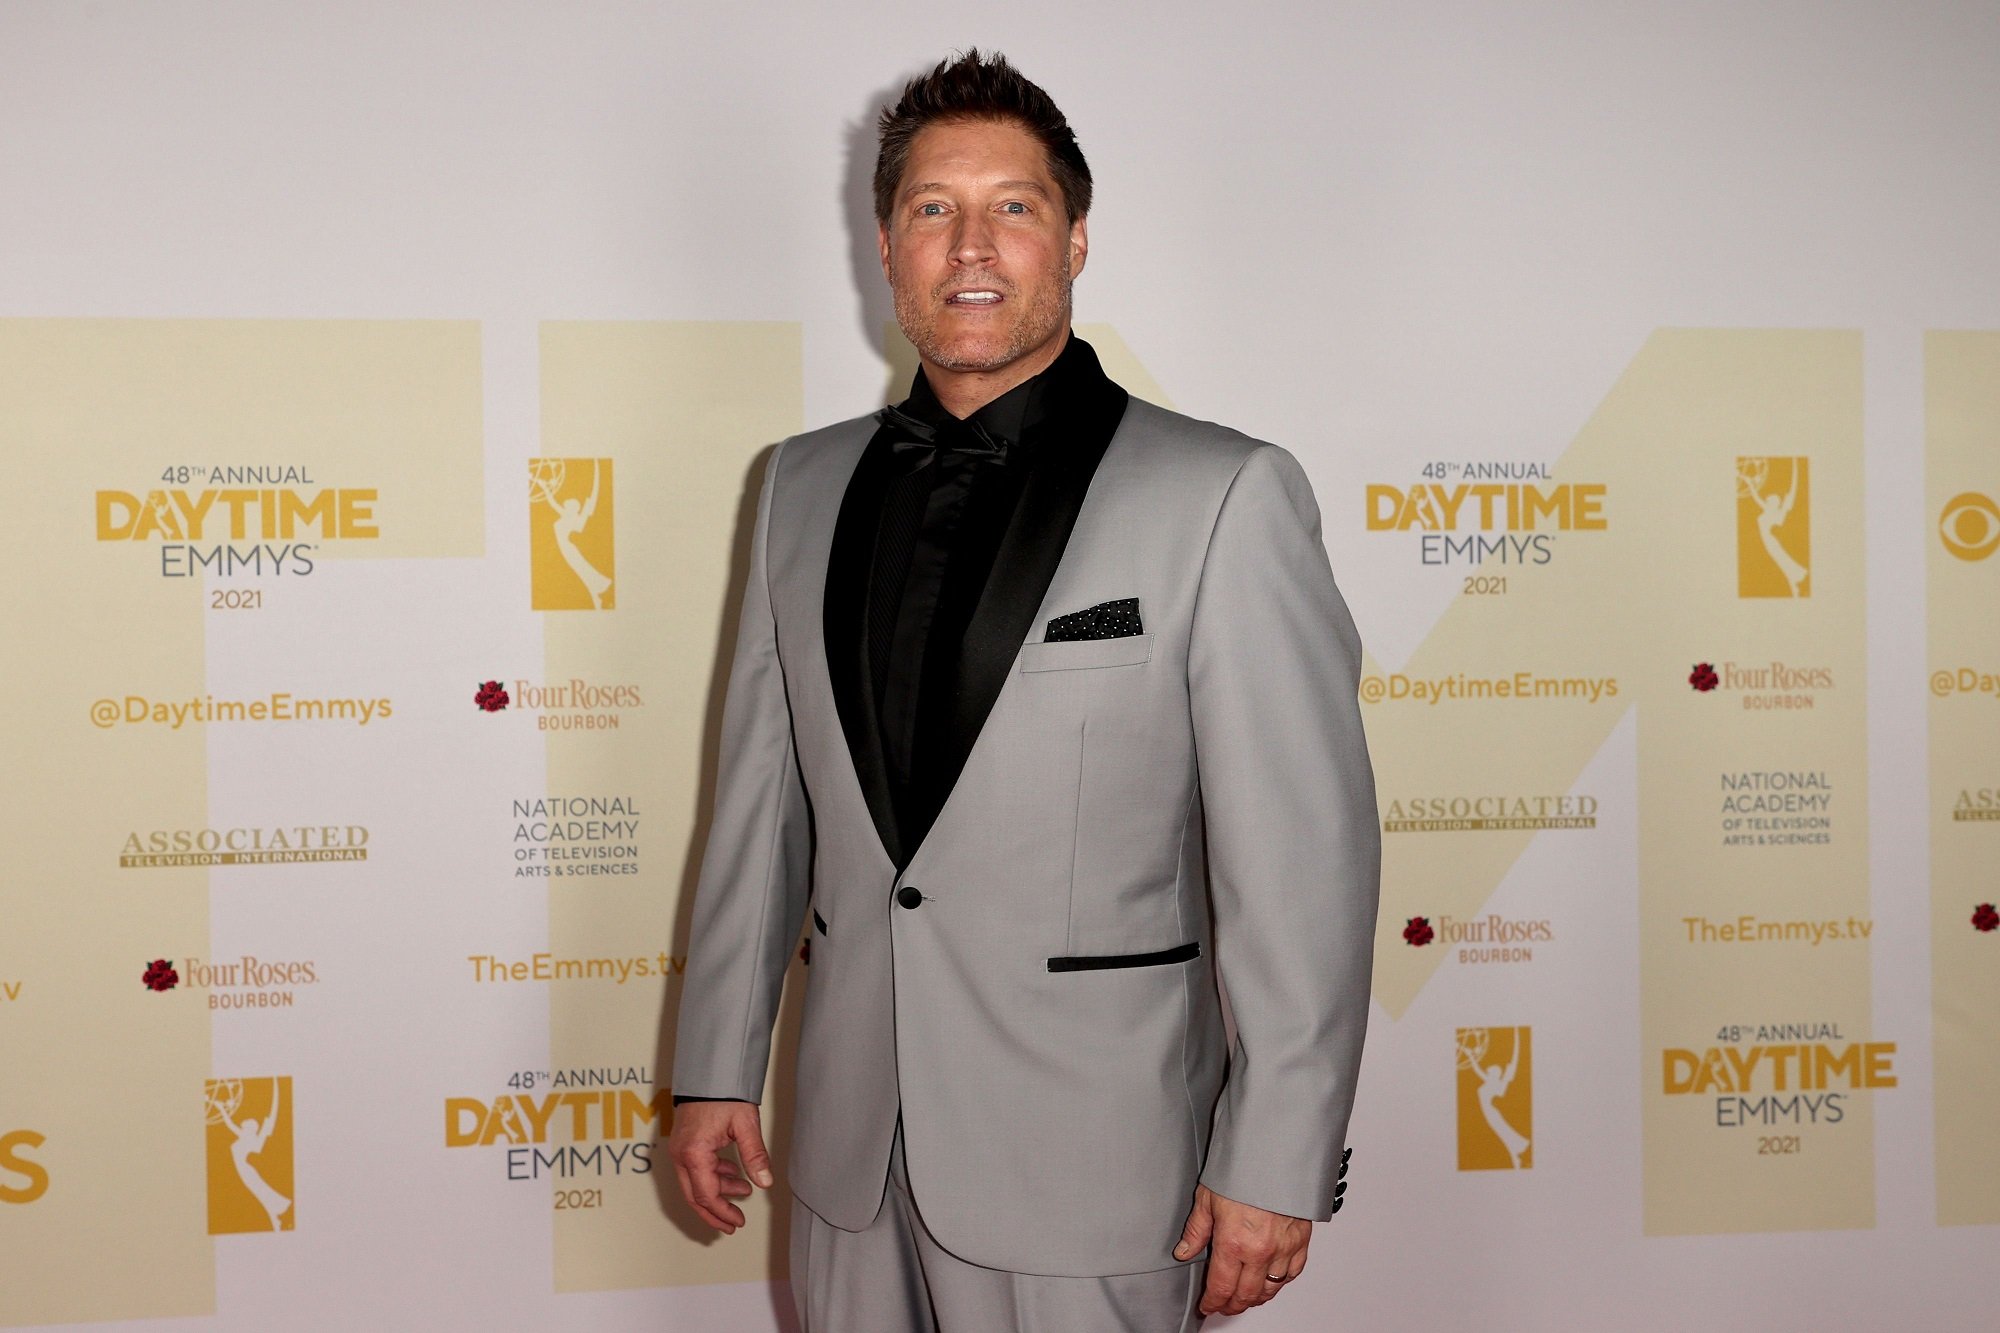 The Bold and the Beautiful star Sean Kanan, pictured here in a silver tuxedo